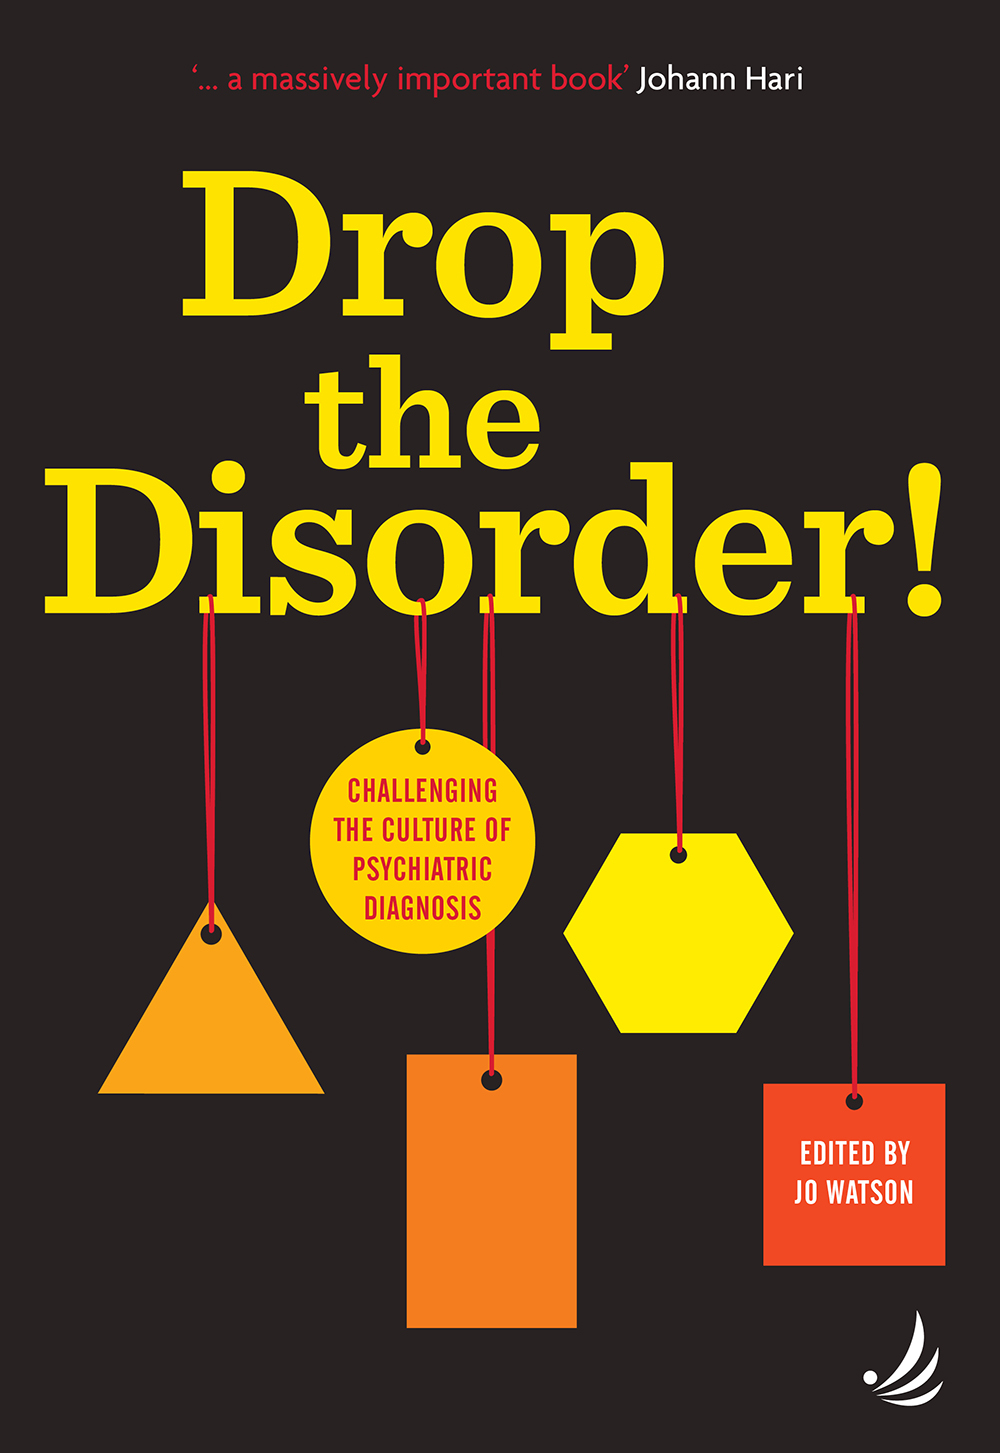 “A Disorder for Everyone!” - Challenging the culture of psychiatric diagnosis - Ipswich